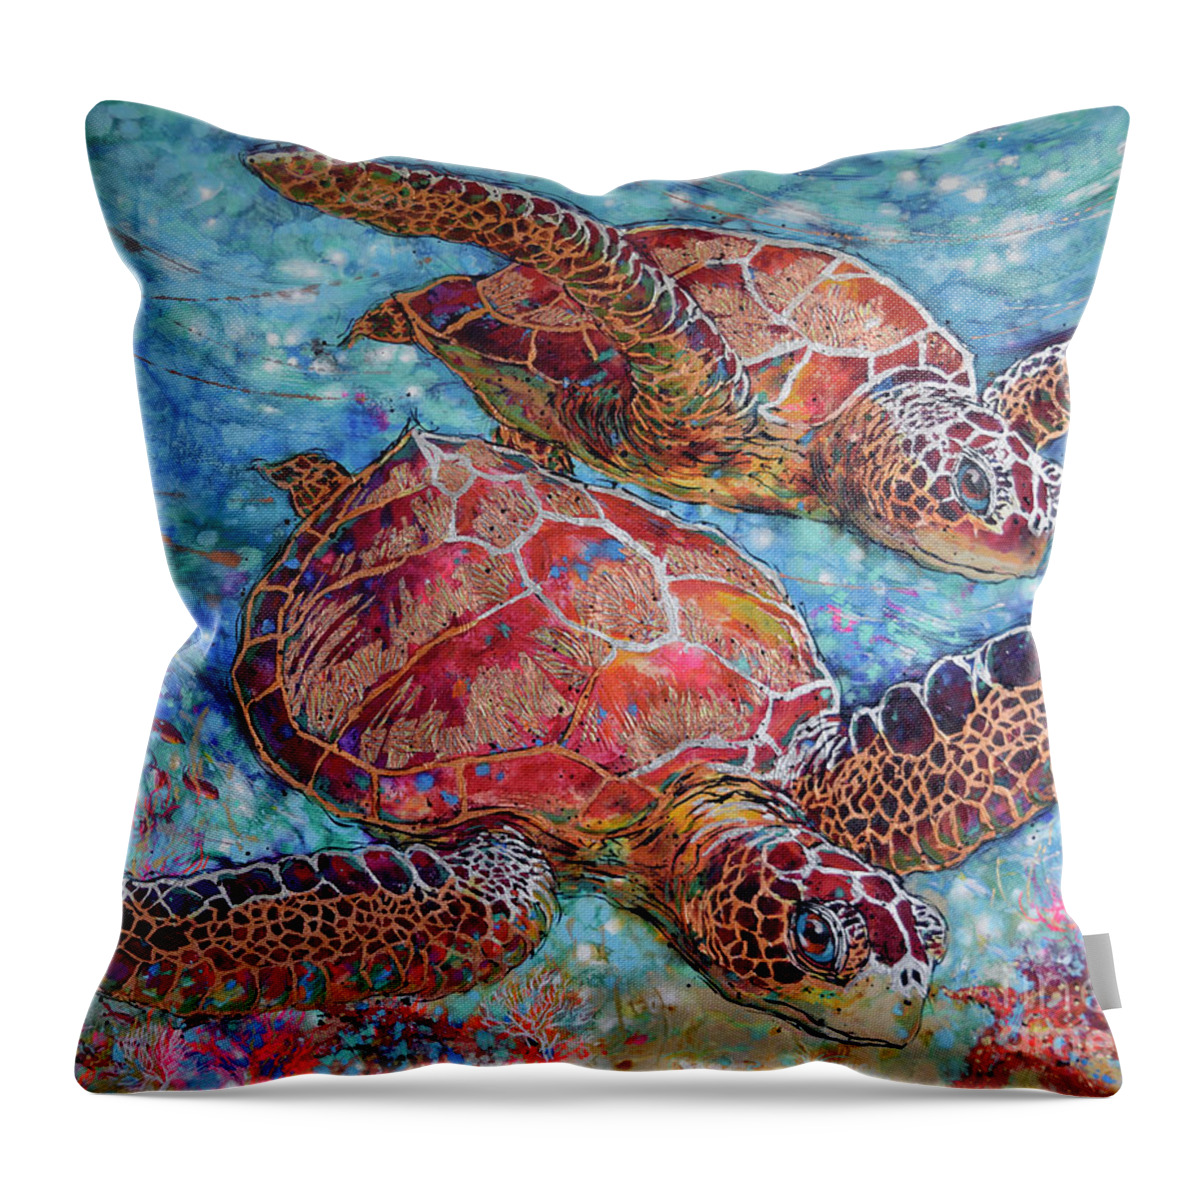 Green Sea Turtles Throw Pillow featuring the painting Grand Sea Turtles by Jyotika Shroff